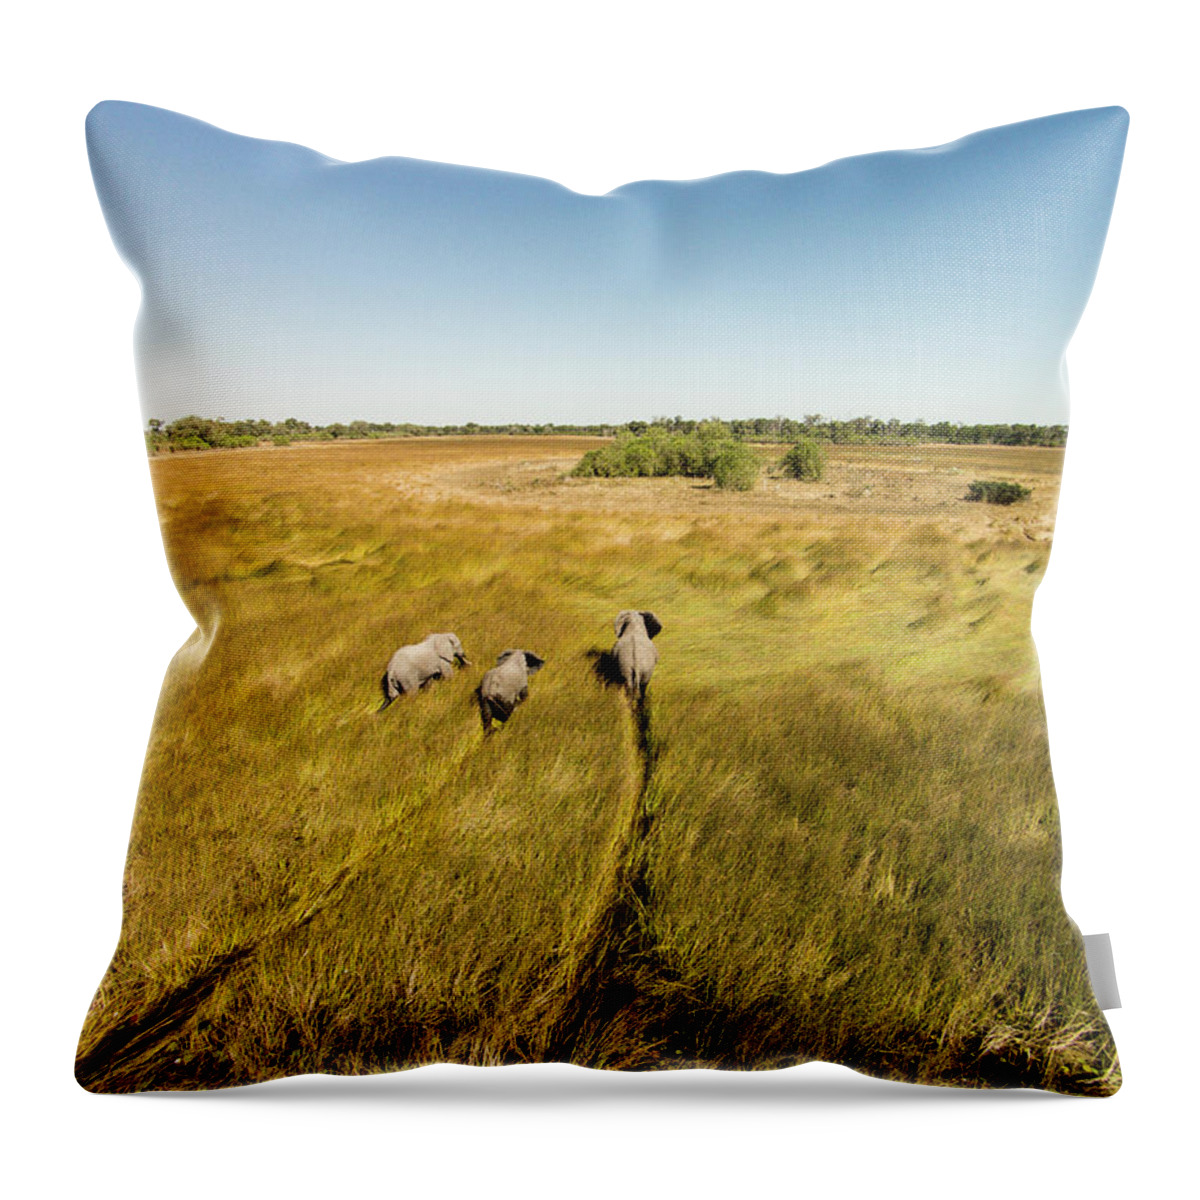 Scenics Throw Pillow featuring the photograph Aerial View Of Elephants In Marsh by Paul Souders